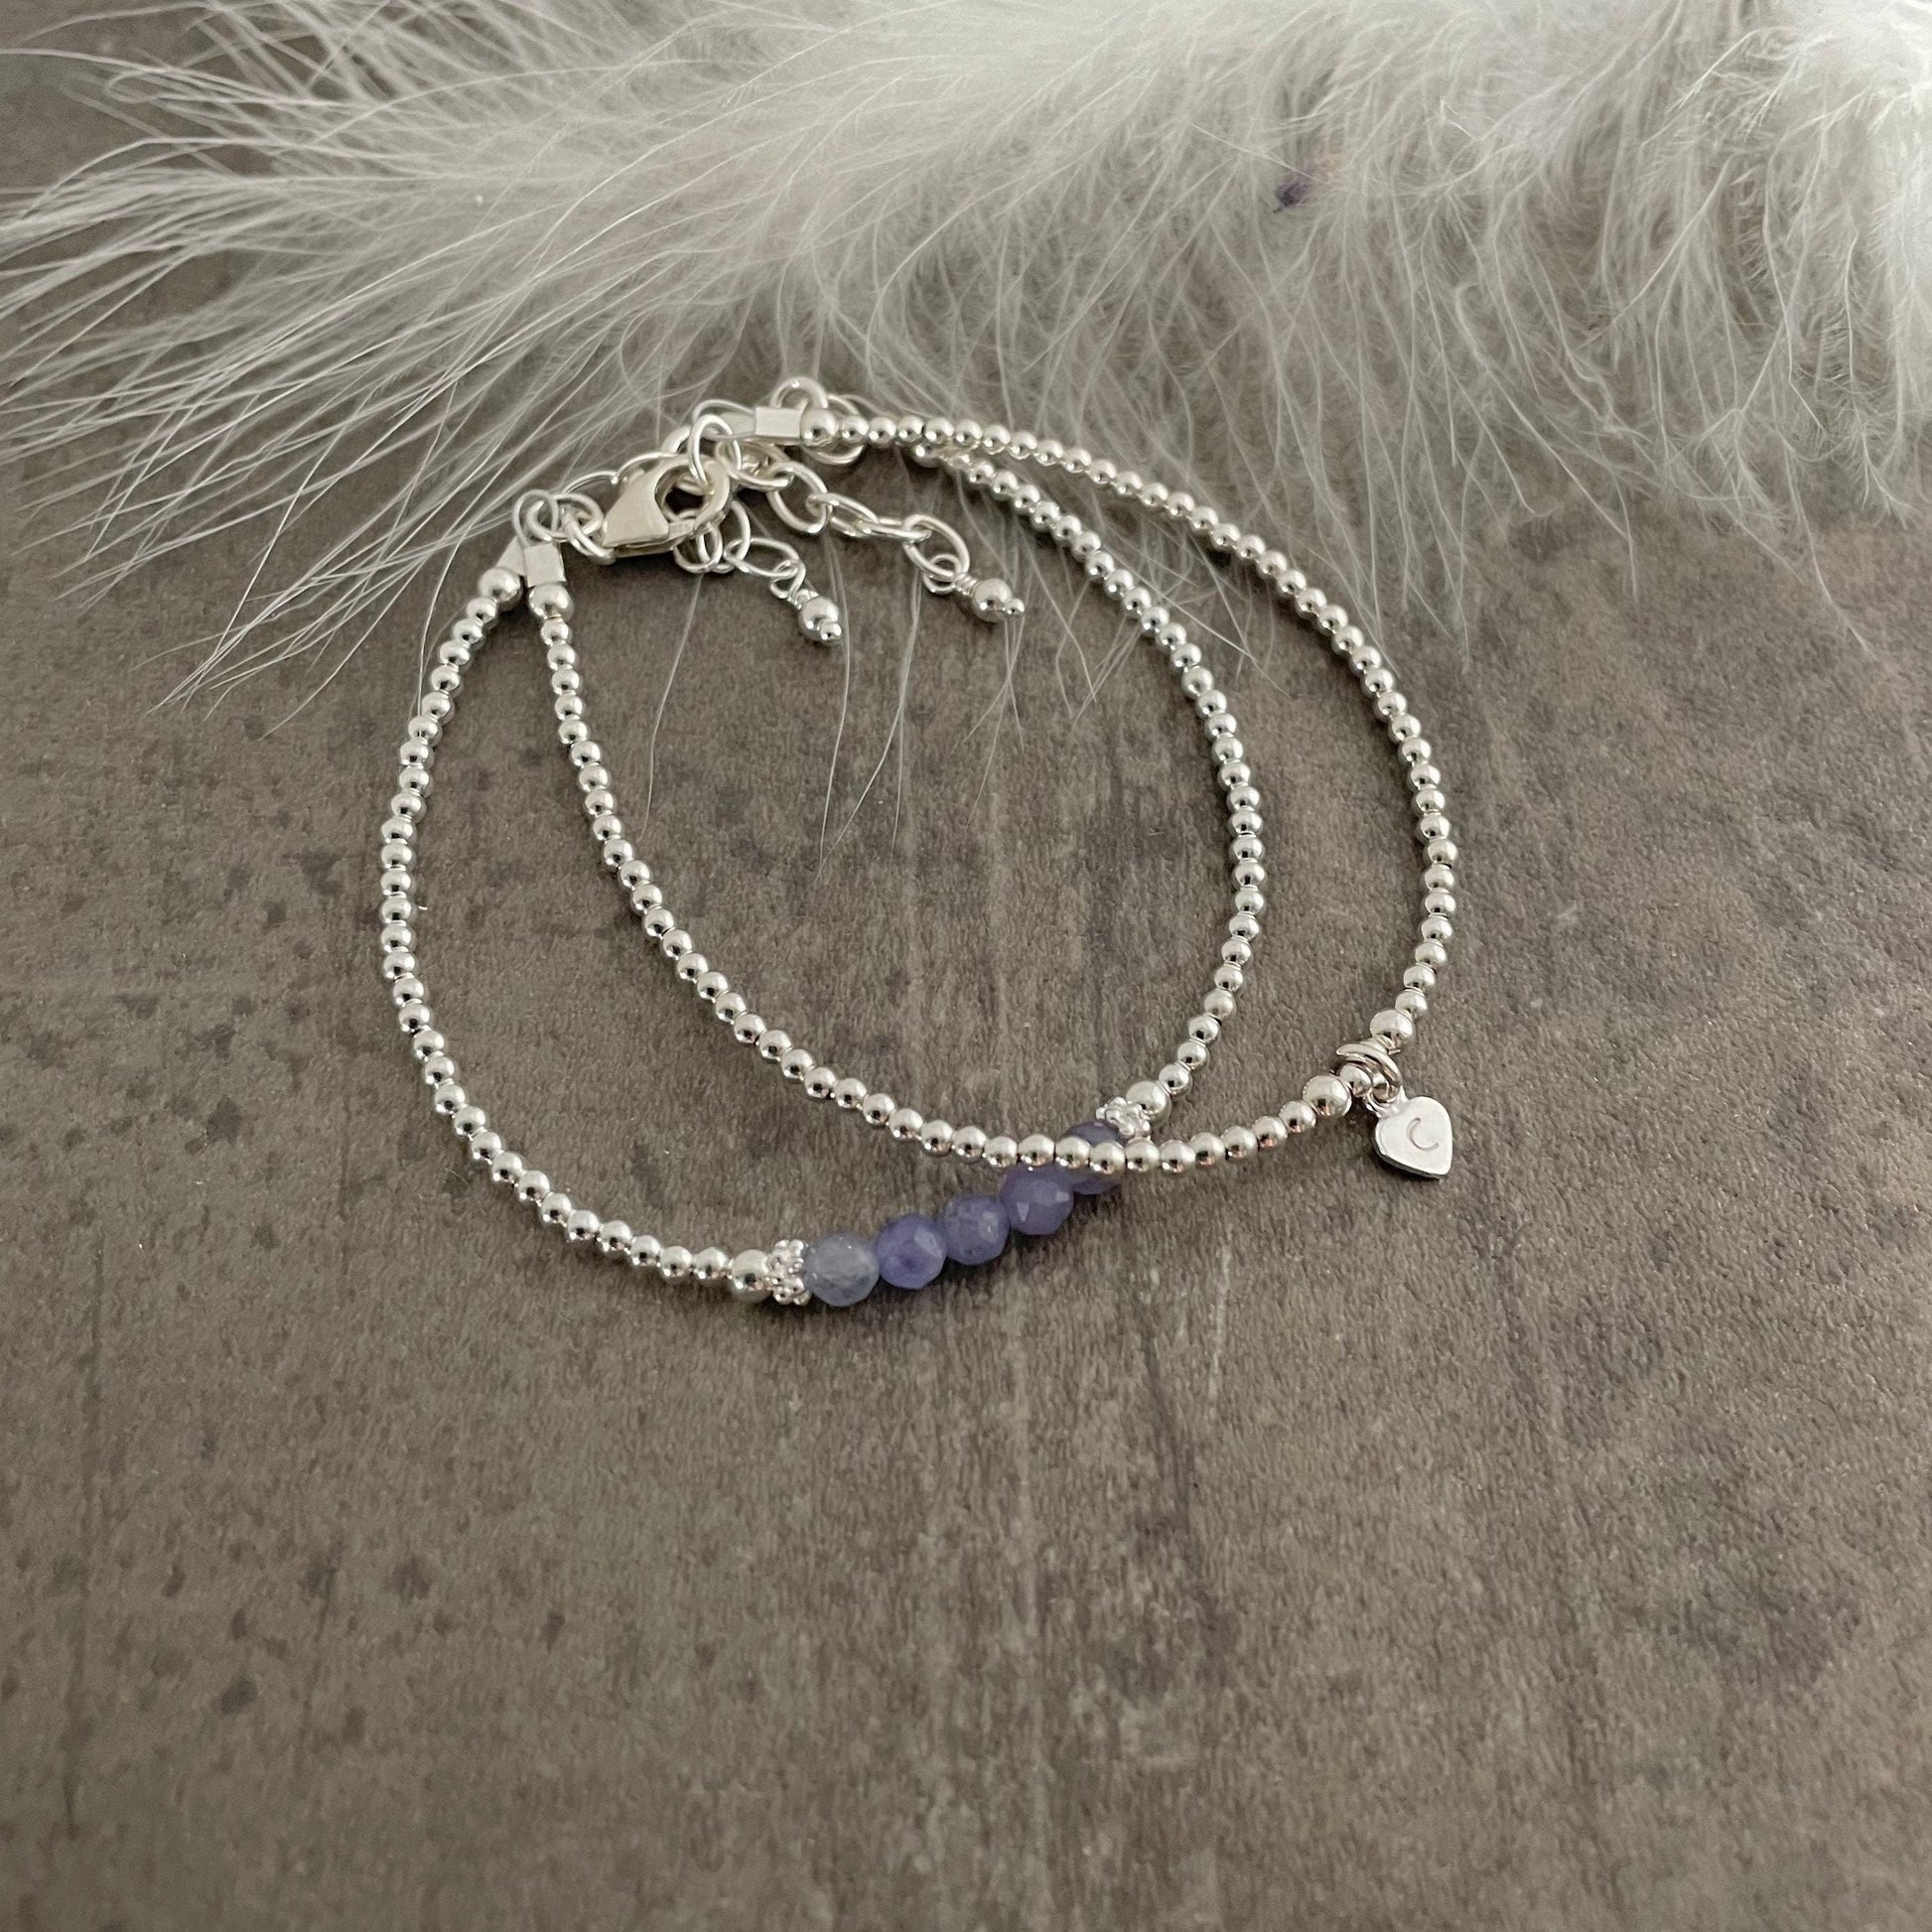 Set of Personalised December Birthstone Bracelets, made with Tanzanite and sterling silver, Stacking Bracelet Set for December Birthday